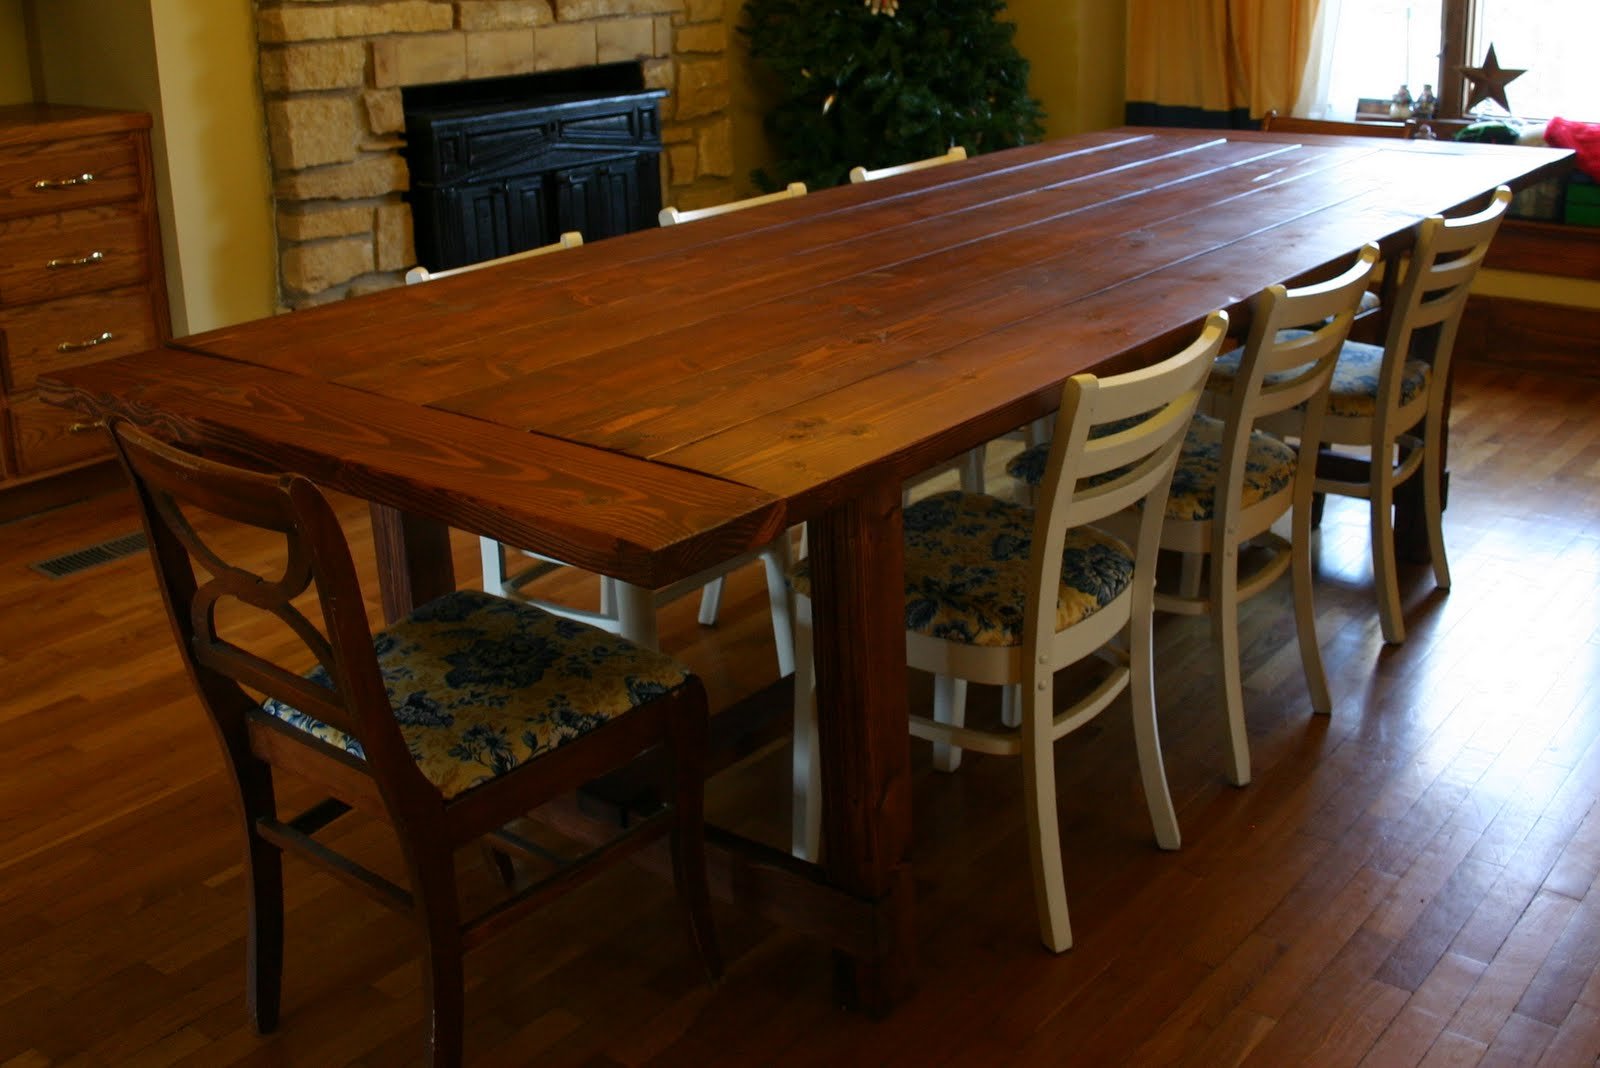  popular woodworking plans kitchen table table woodworking plans free